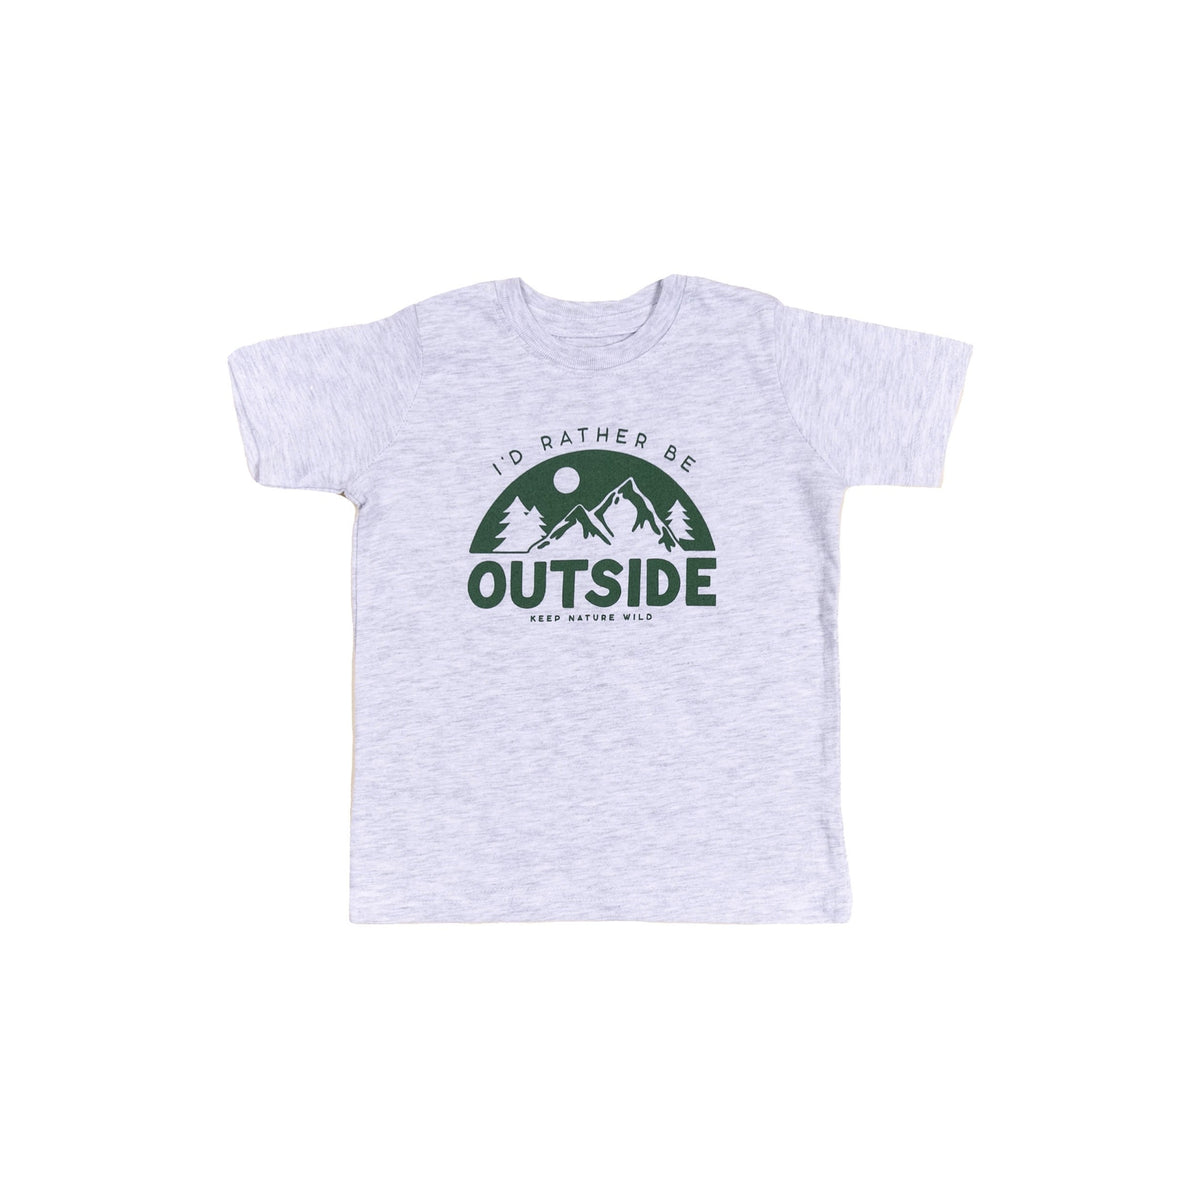 I'd Rather Be Outside Tee - Toddler & Youth Sizes